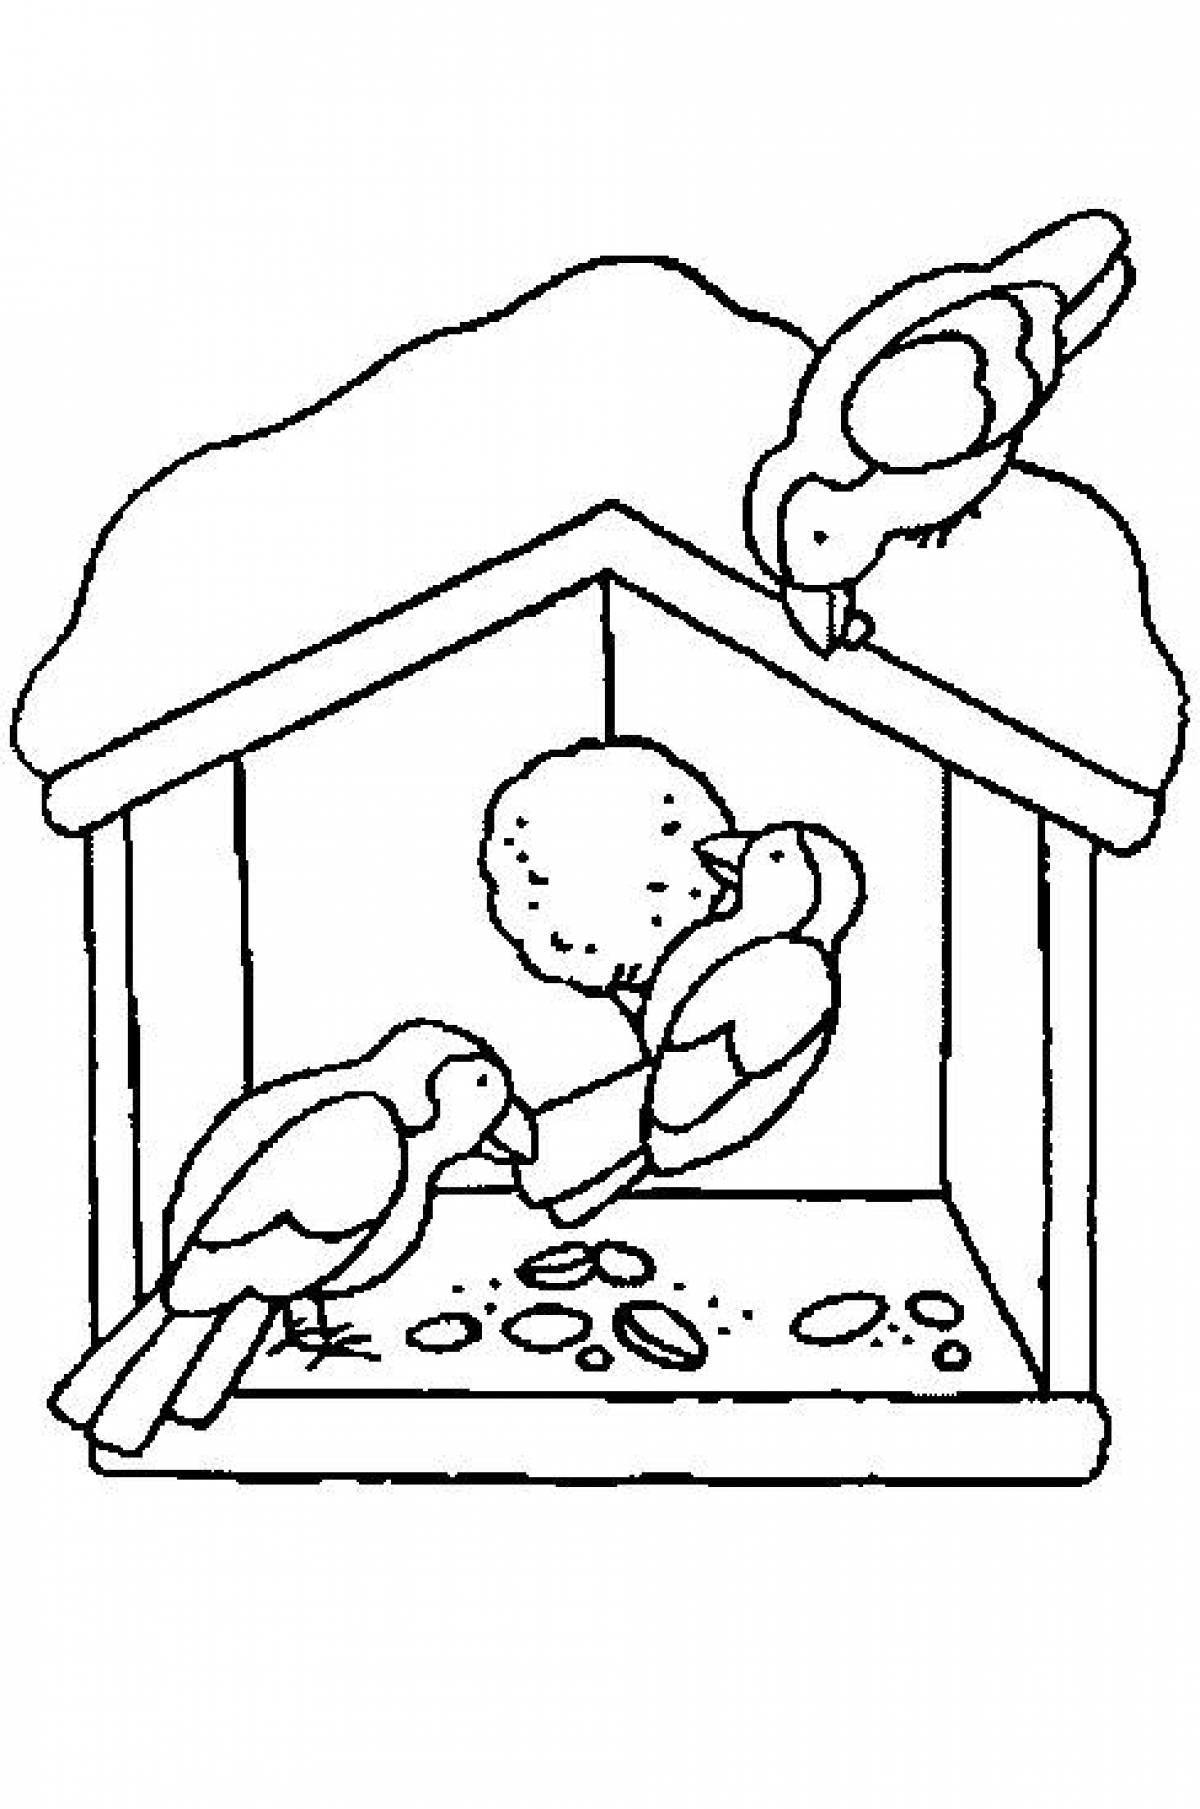 Great Bird Feeding in Winter coloring page